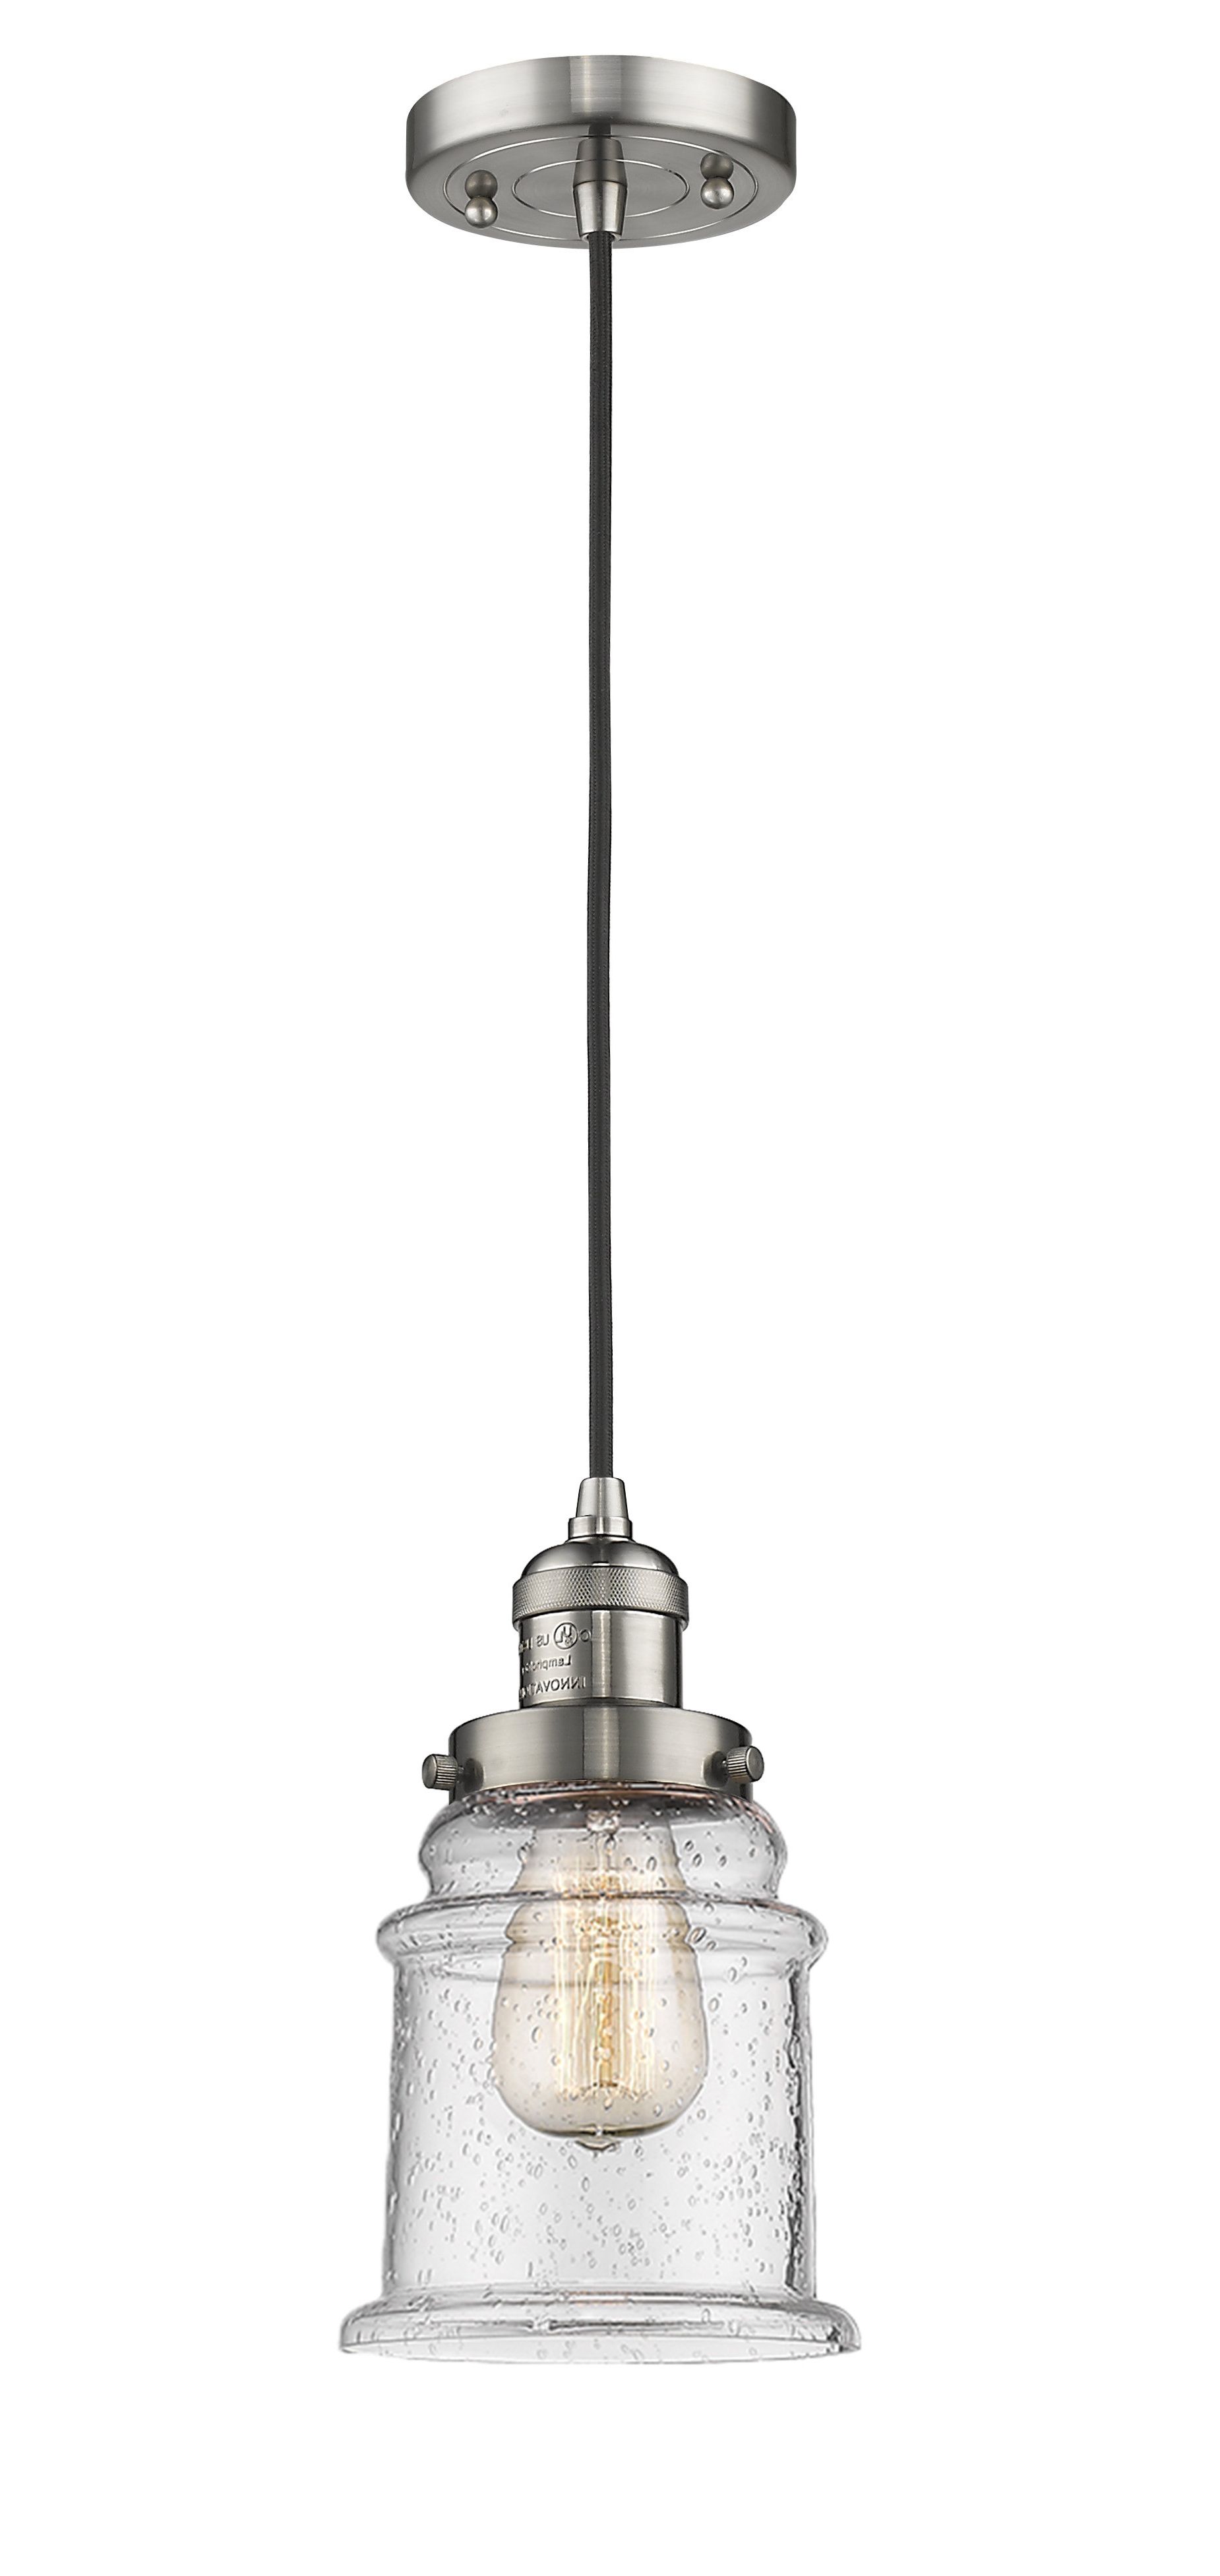 Pewter & Silver & Satin Nickel Pendant Lighting You'll Love Pertaining To Preferred Kraker 1 Light Single Cylinder Pendants (View 17 of 25)